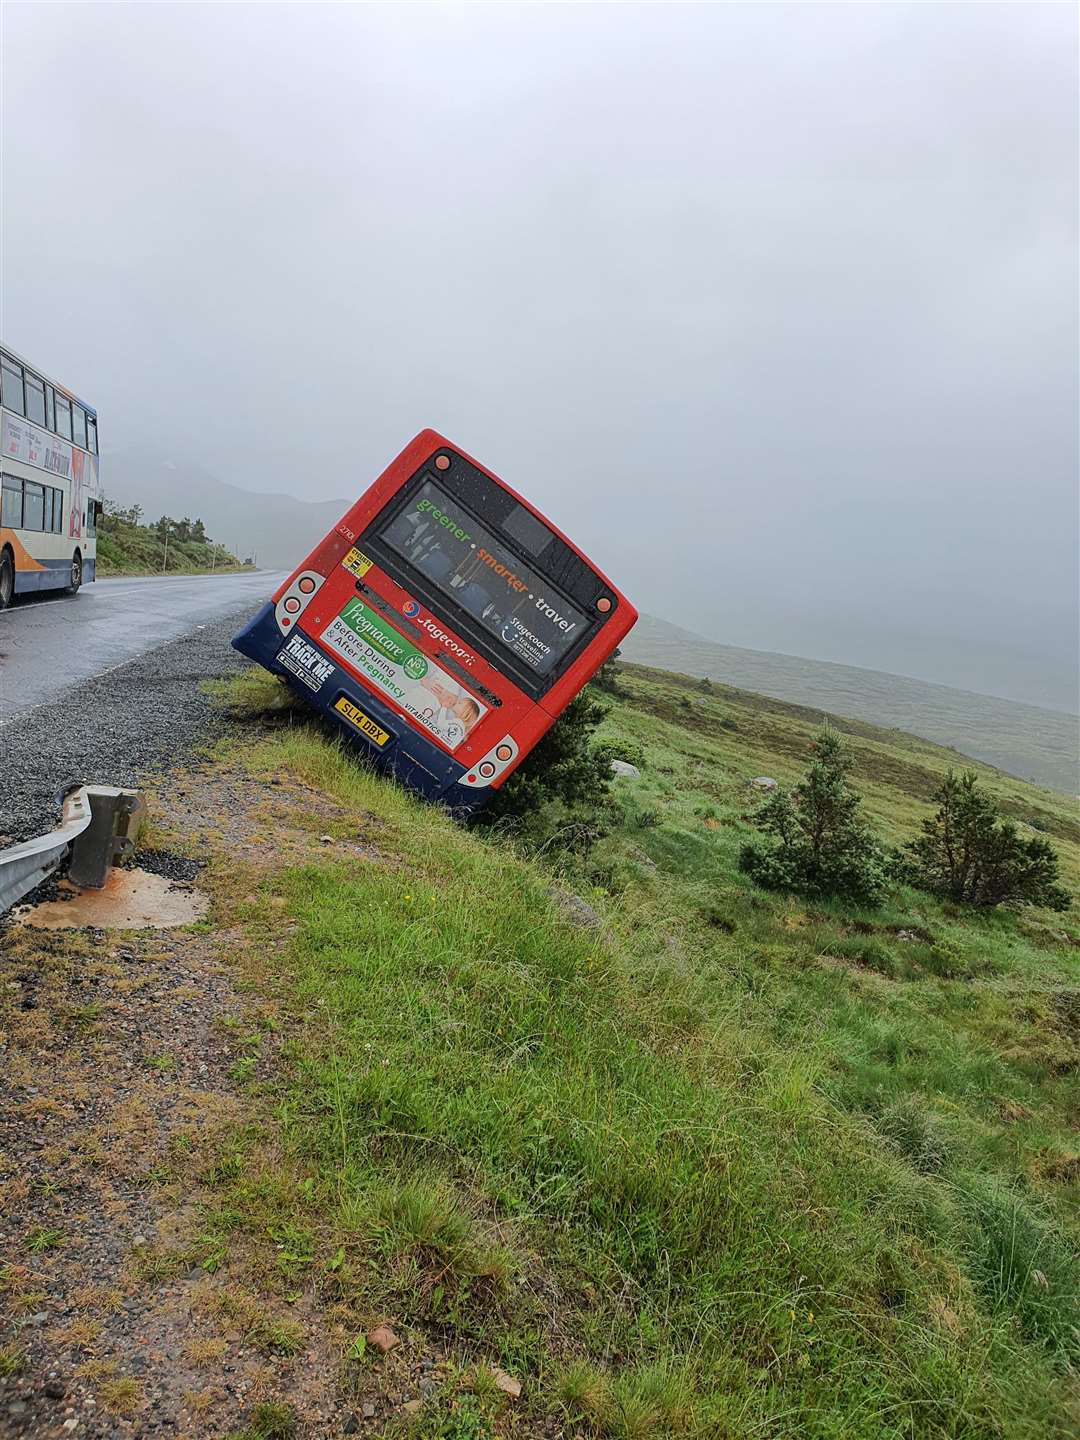 Perilous: the bus was left clinging to the edge of the road